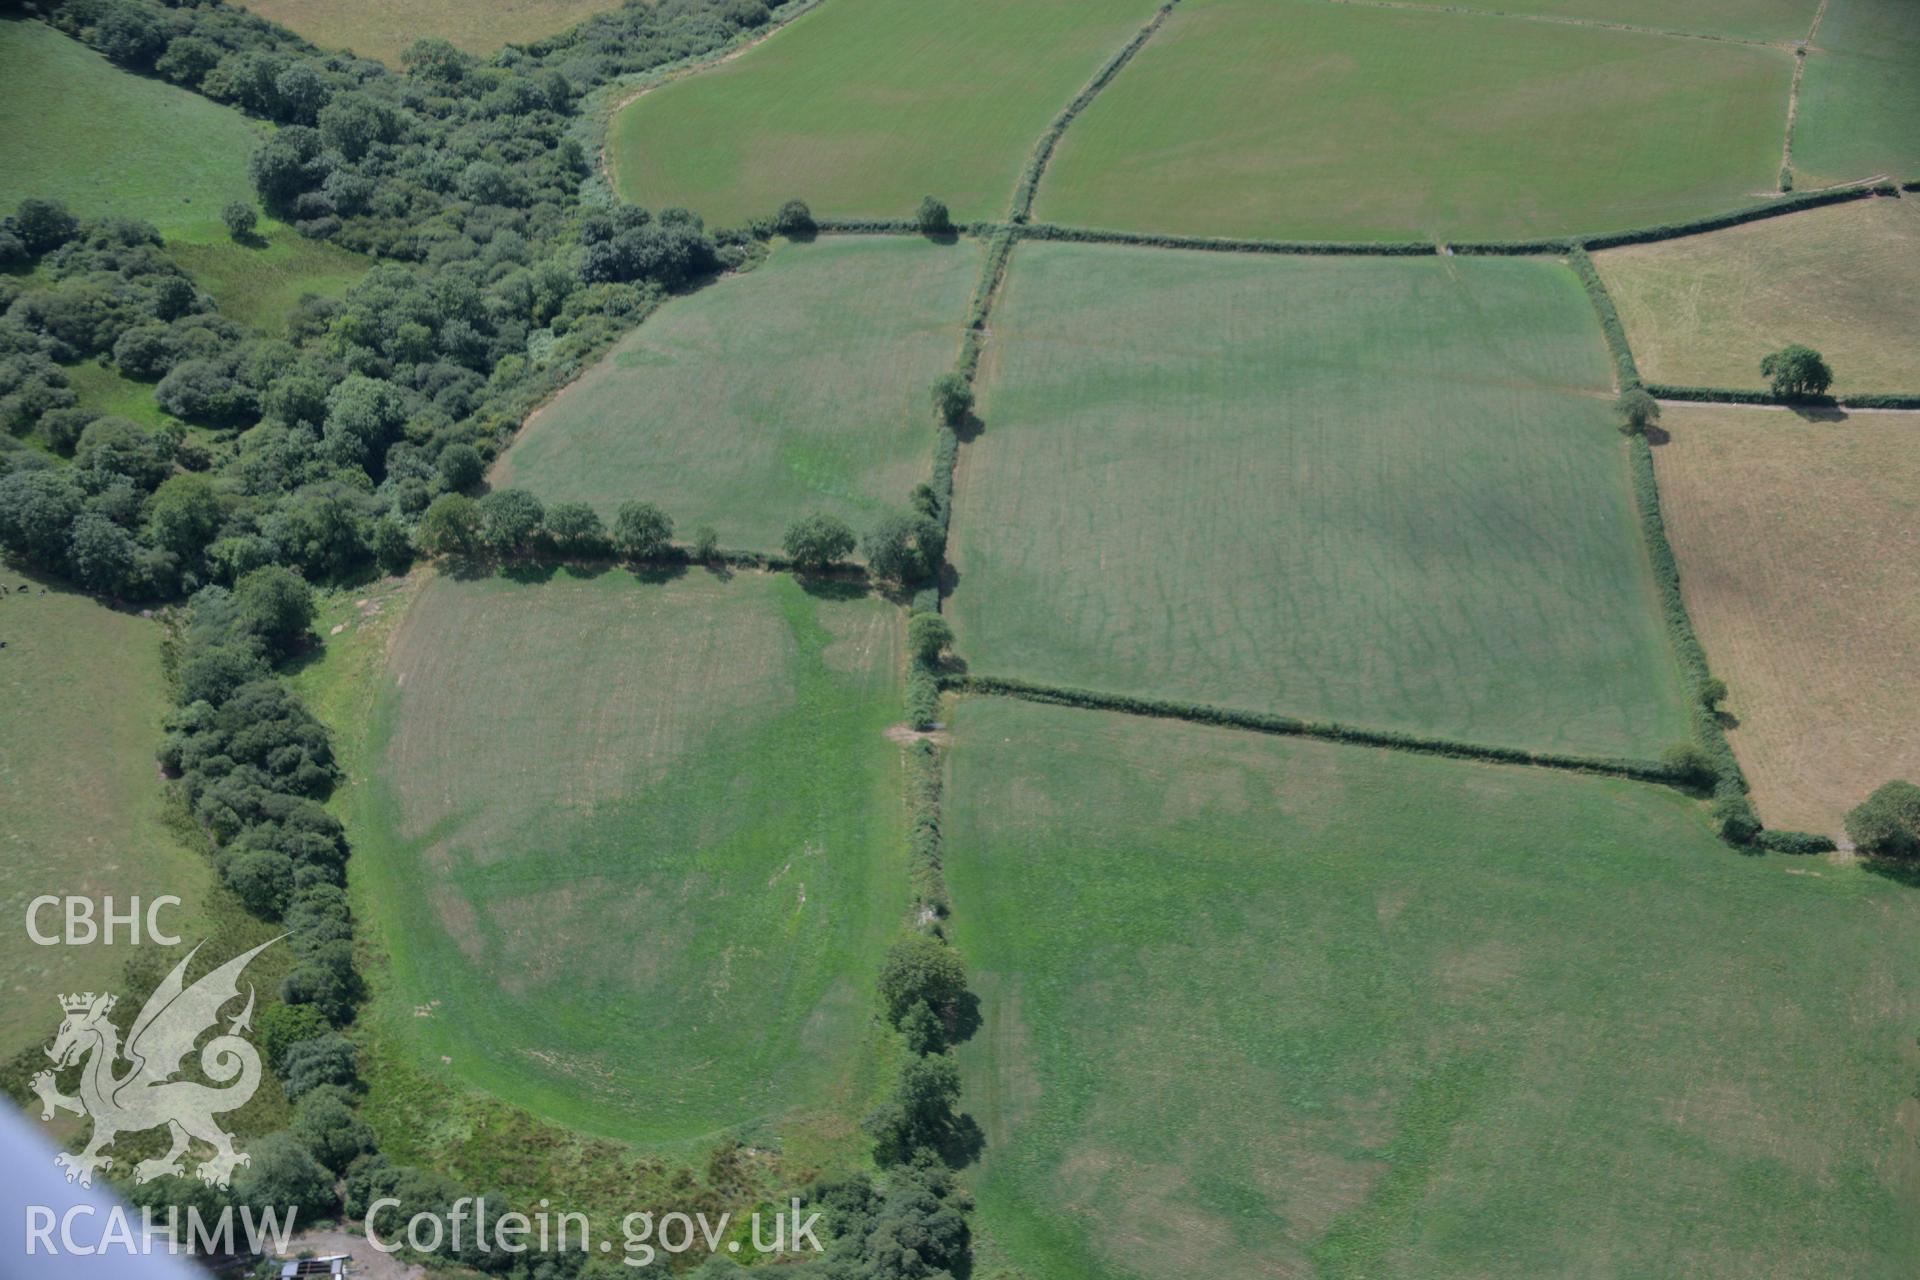 RCAHMW colour oblique aerial photograph of natural cropmarks at Clover Hill. Taken on 27 July 2006 by Toby Driver.